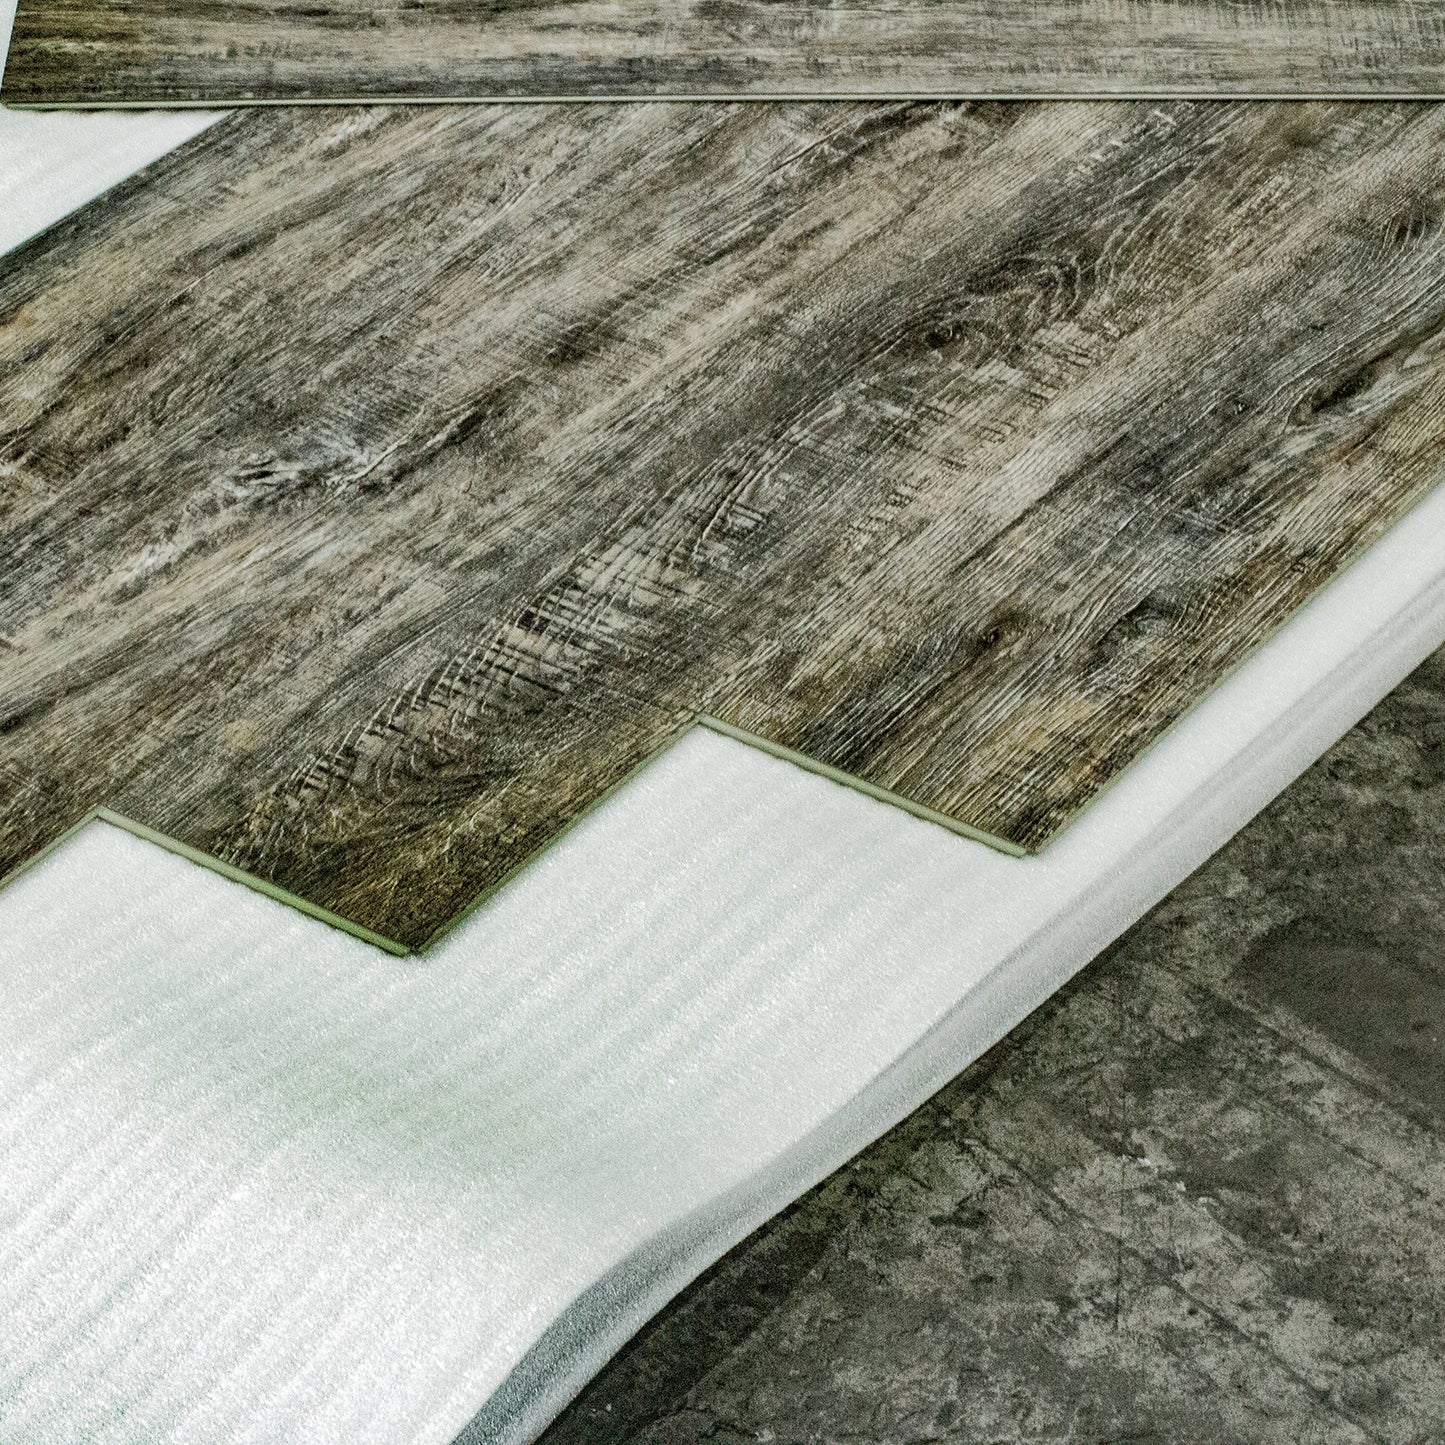 3mm 50sqm Silver Acoustic Underlay  Wood or Laminate Flooring Comfort Insulation